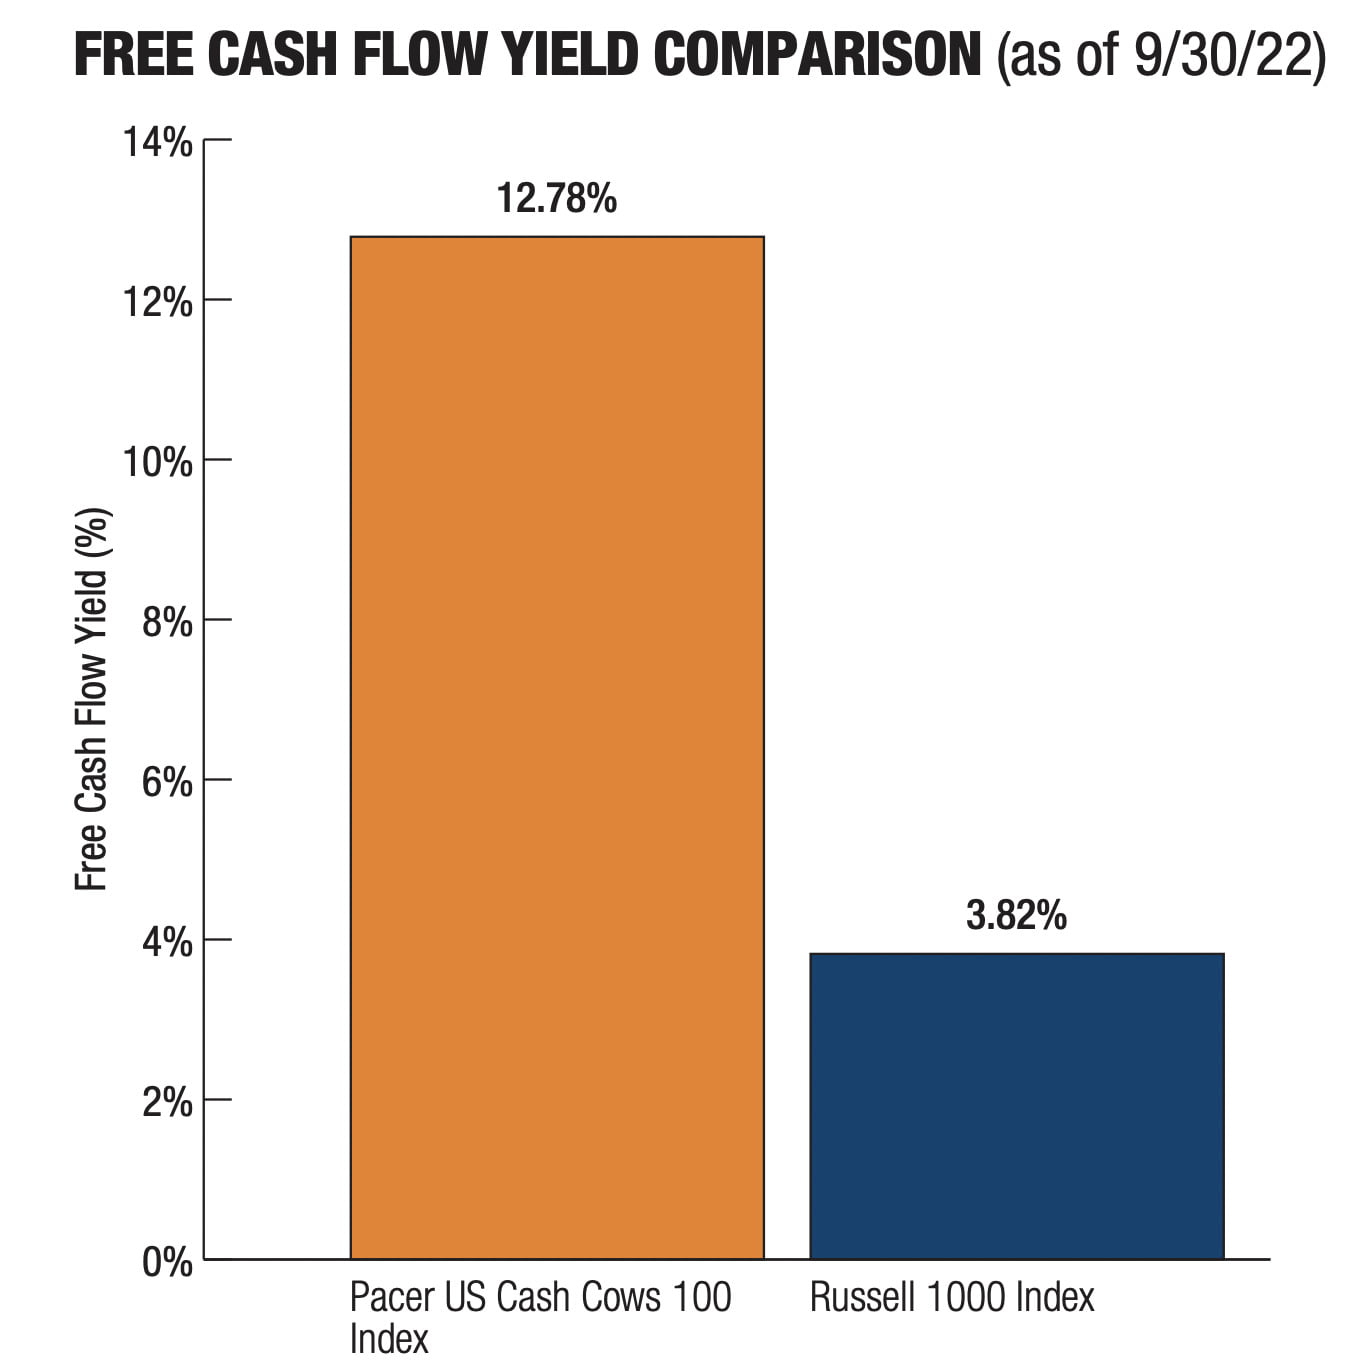 Free Cash Flow Yield Comparison of Pacer US Cash Cows 100 Index vs Russell 1000 Index 